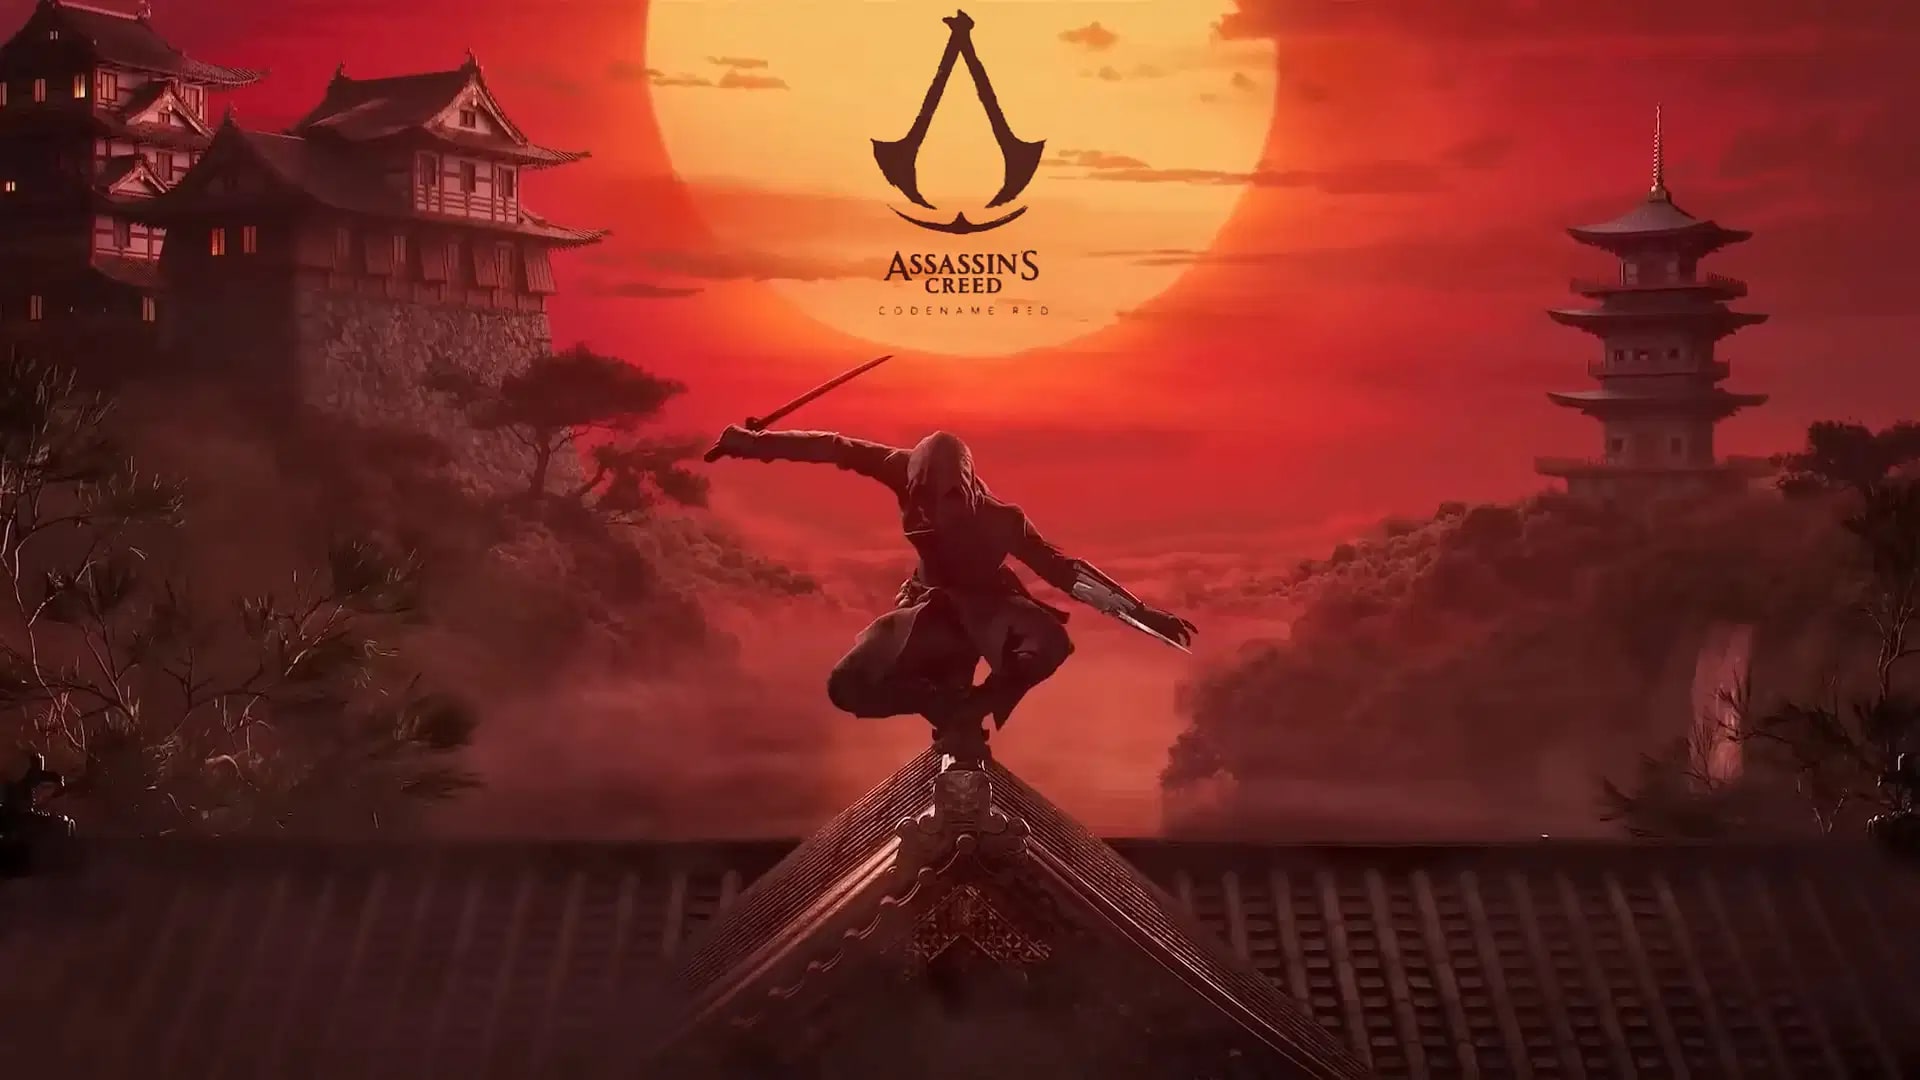 Assassin's Creed Red